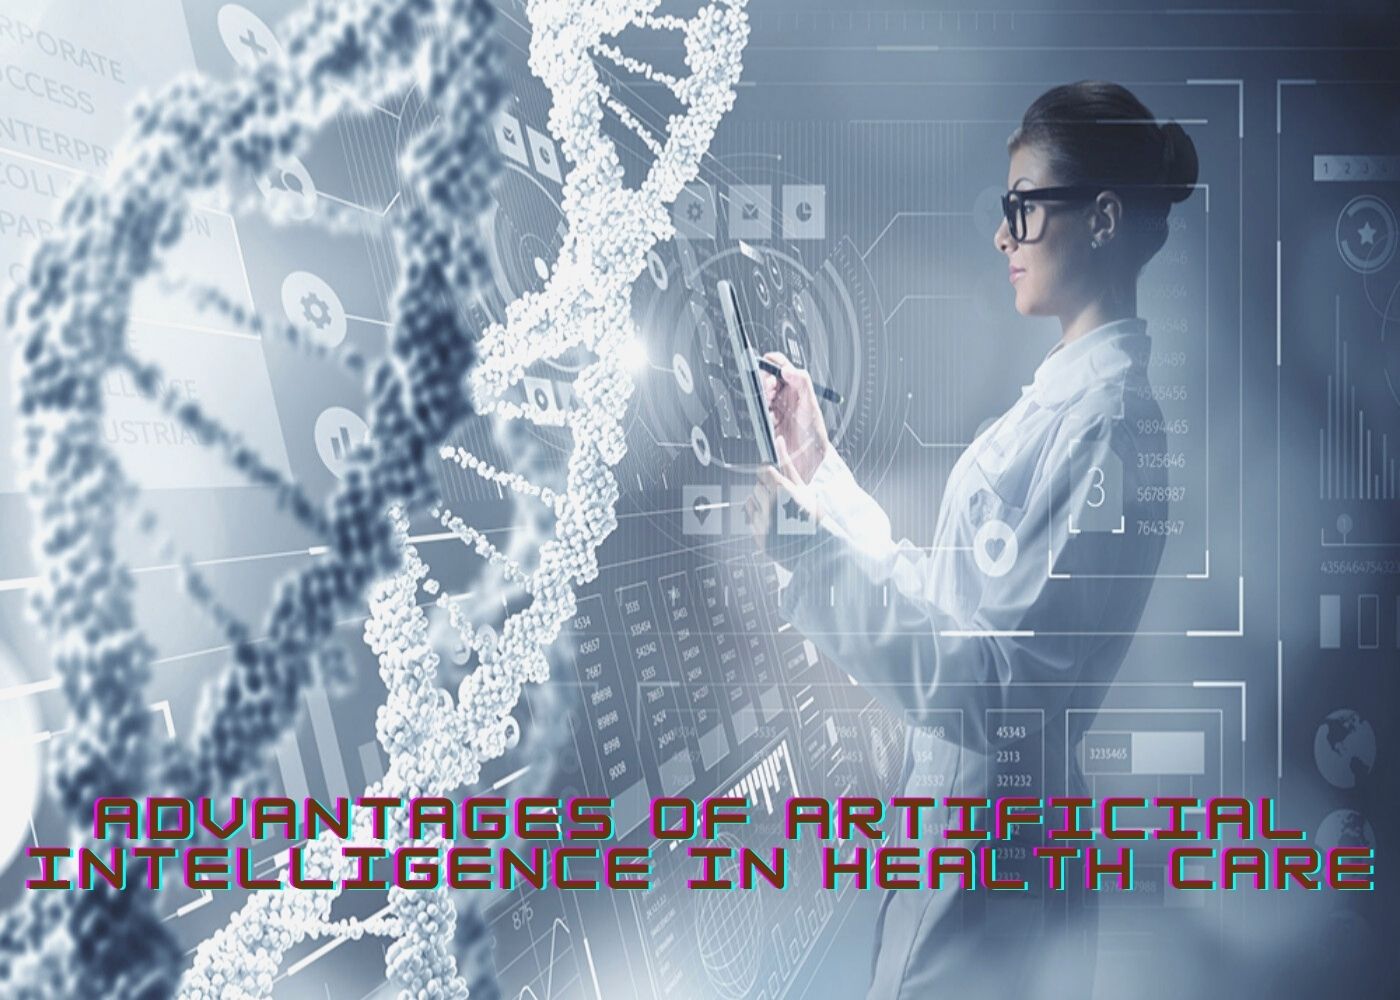  Advantages of Artificial intelligence in health care